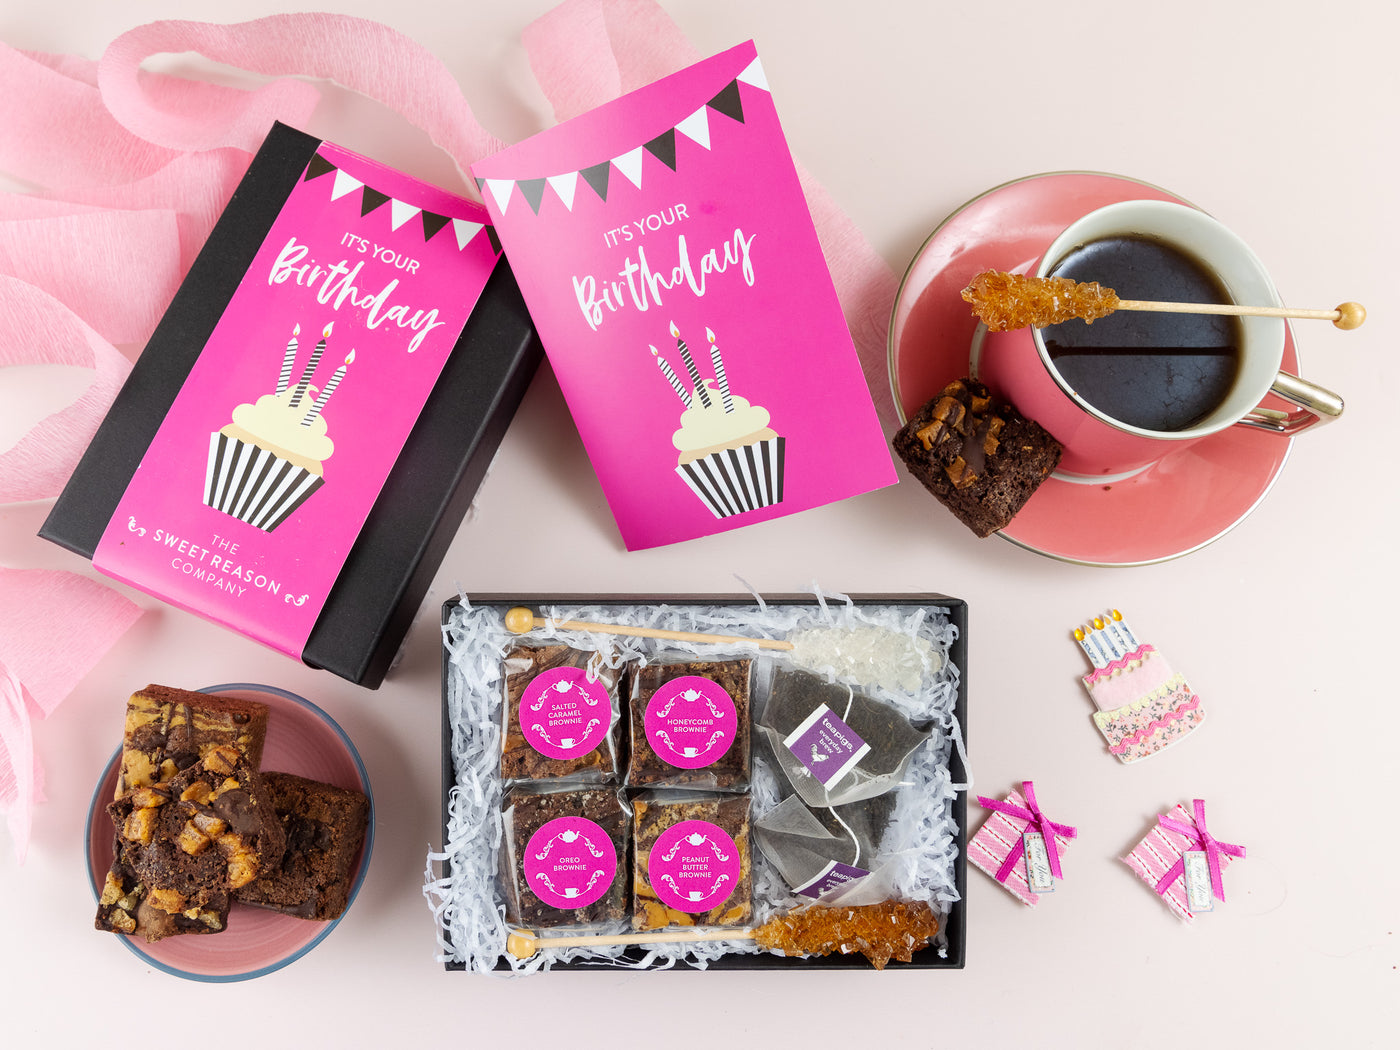 Pink Cupcake design Birthday Brownie gift box surrounded by brownies and a cup of tea